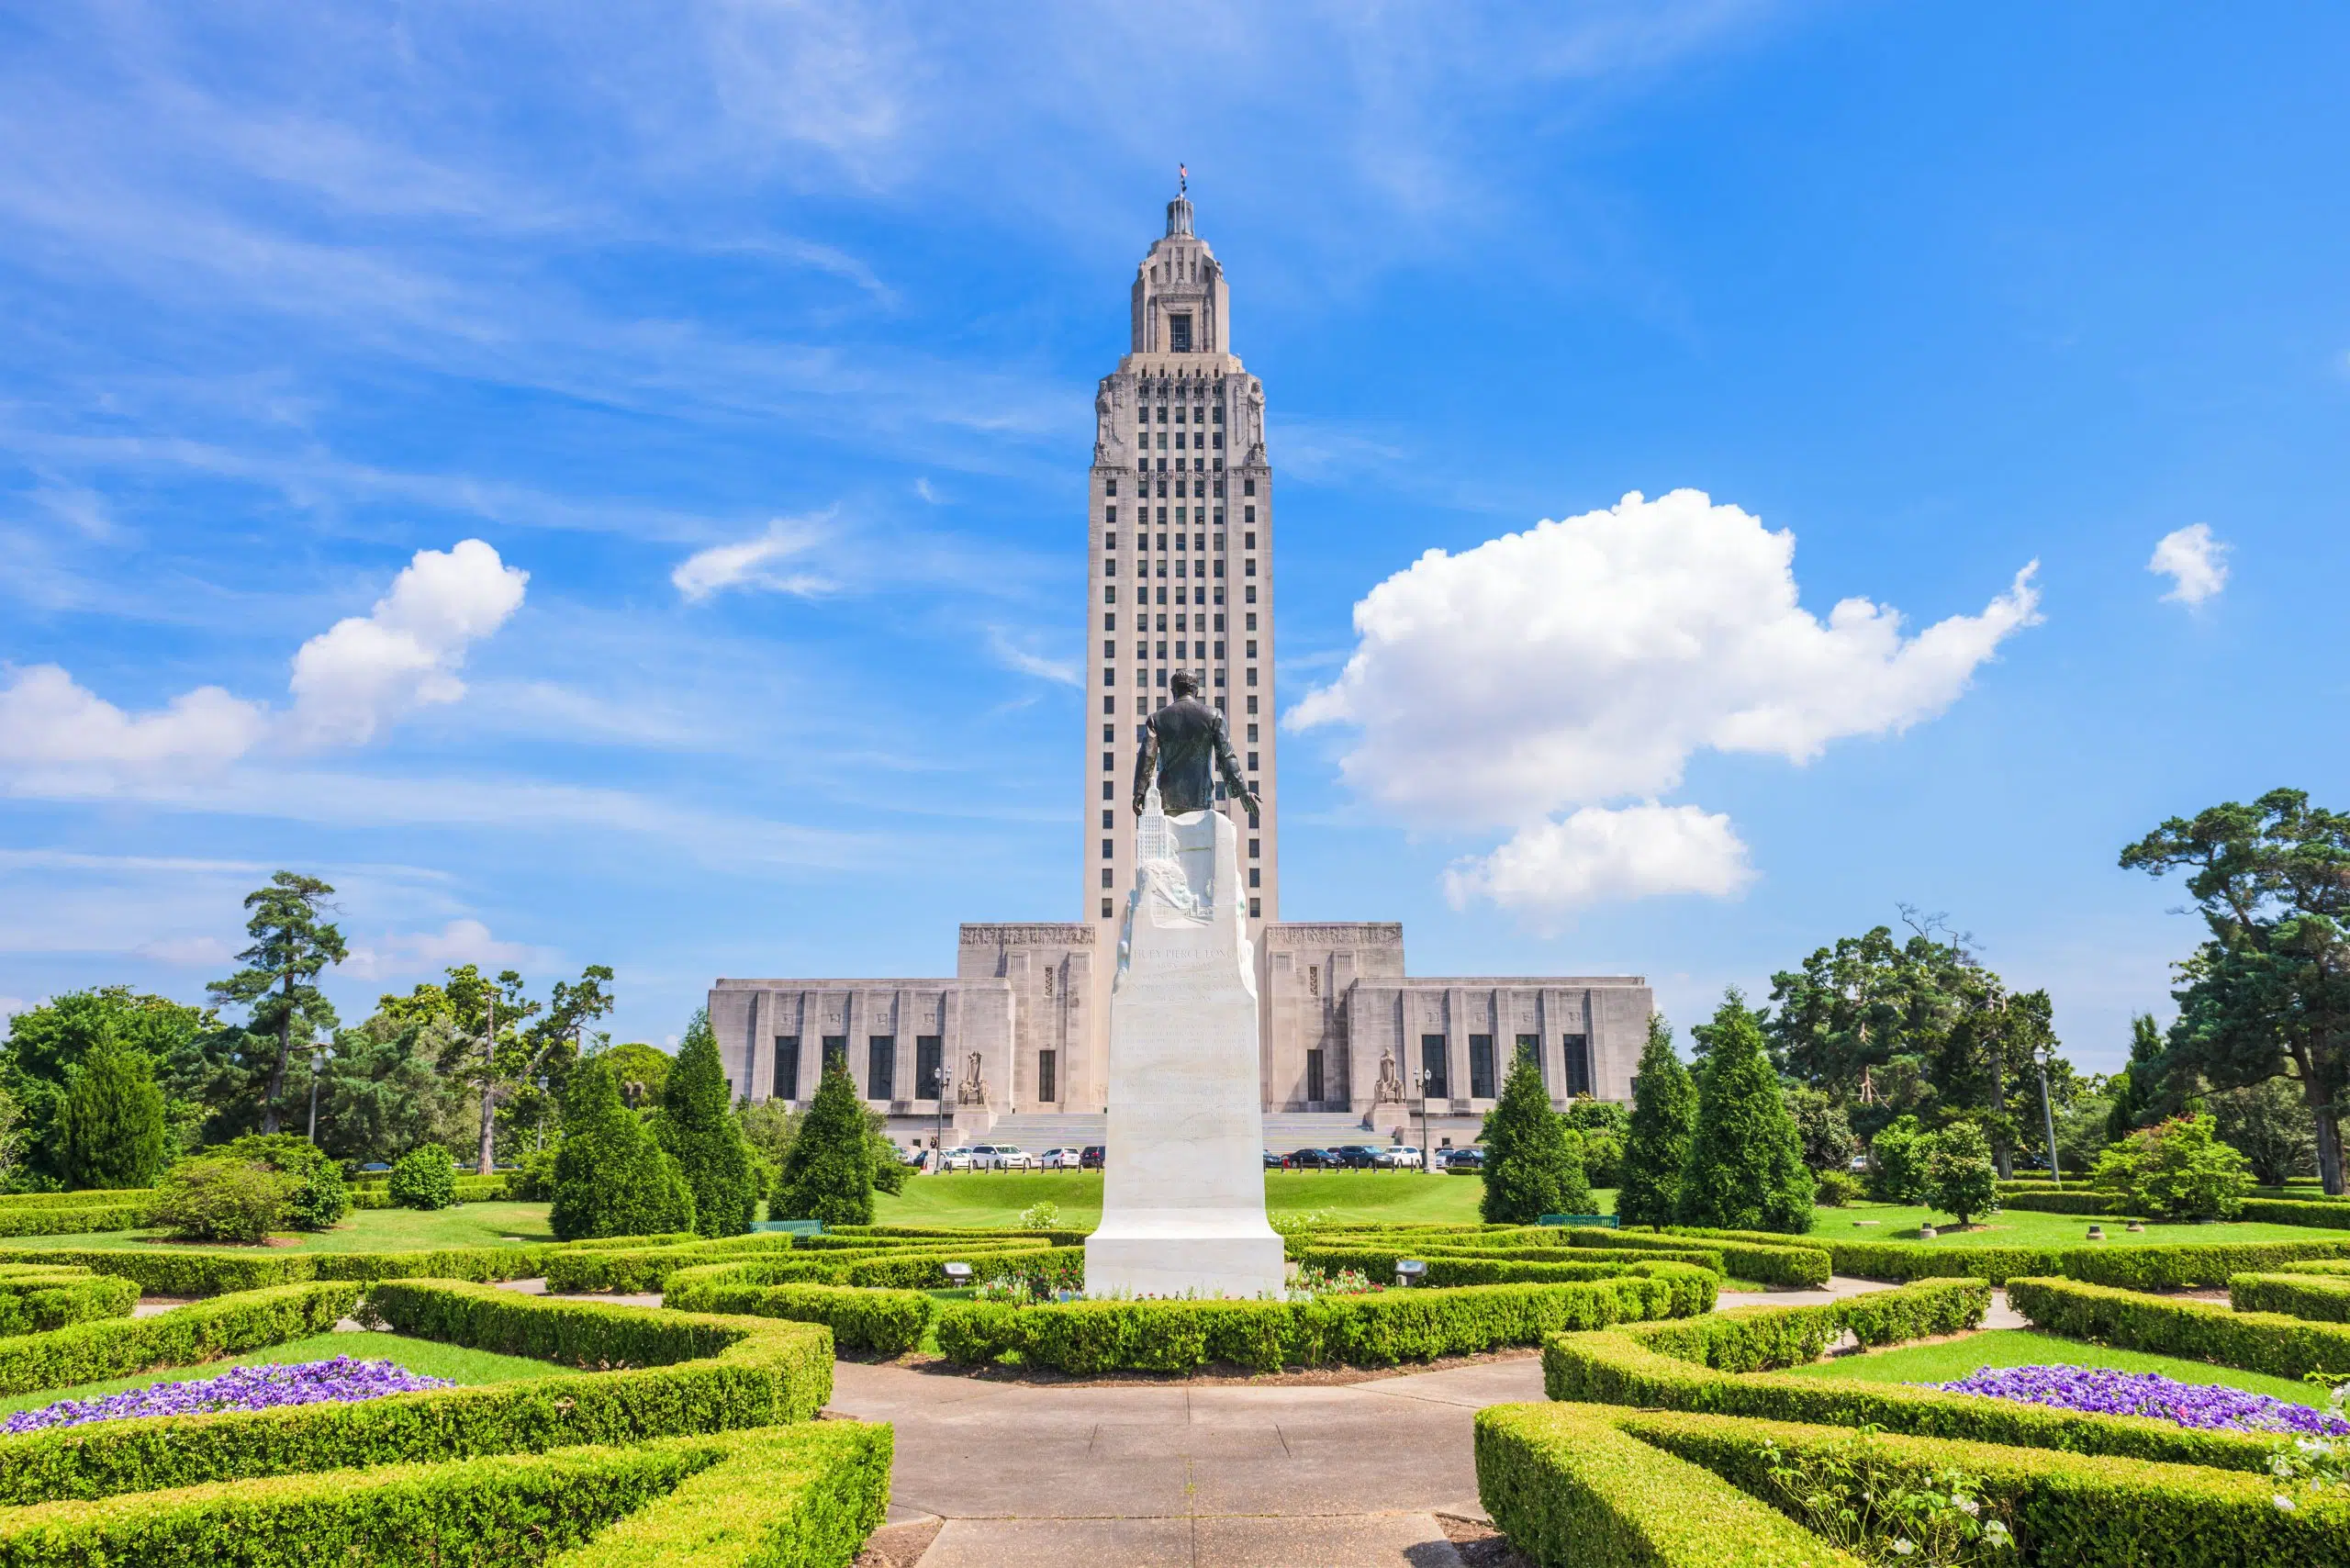 Louisiana lawmakers prepare for special sessions on redistricting and crime